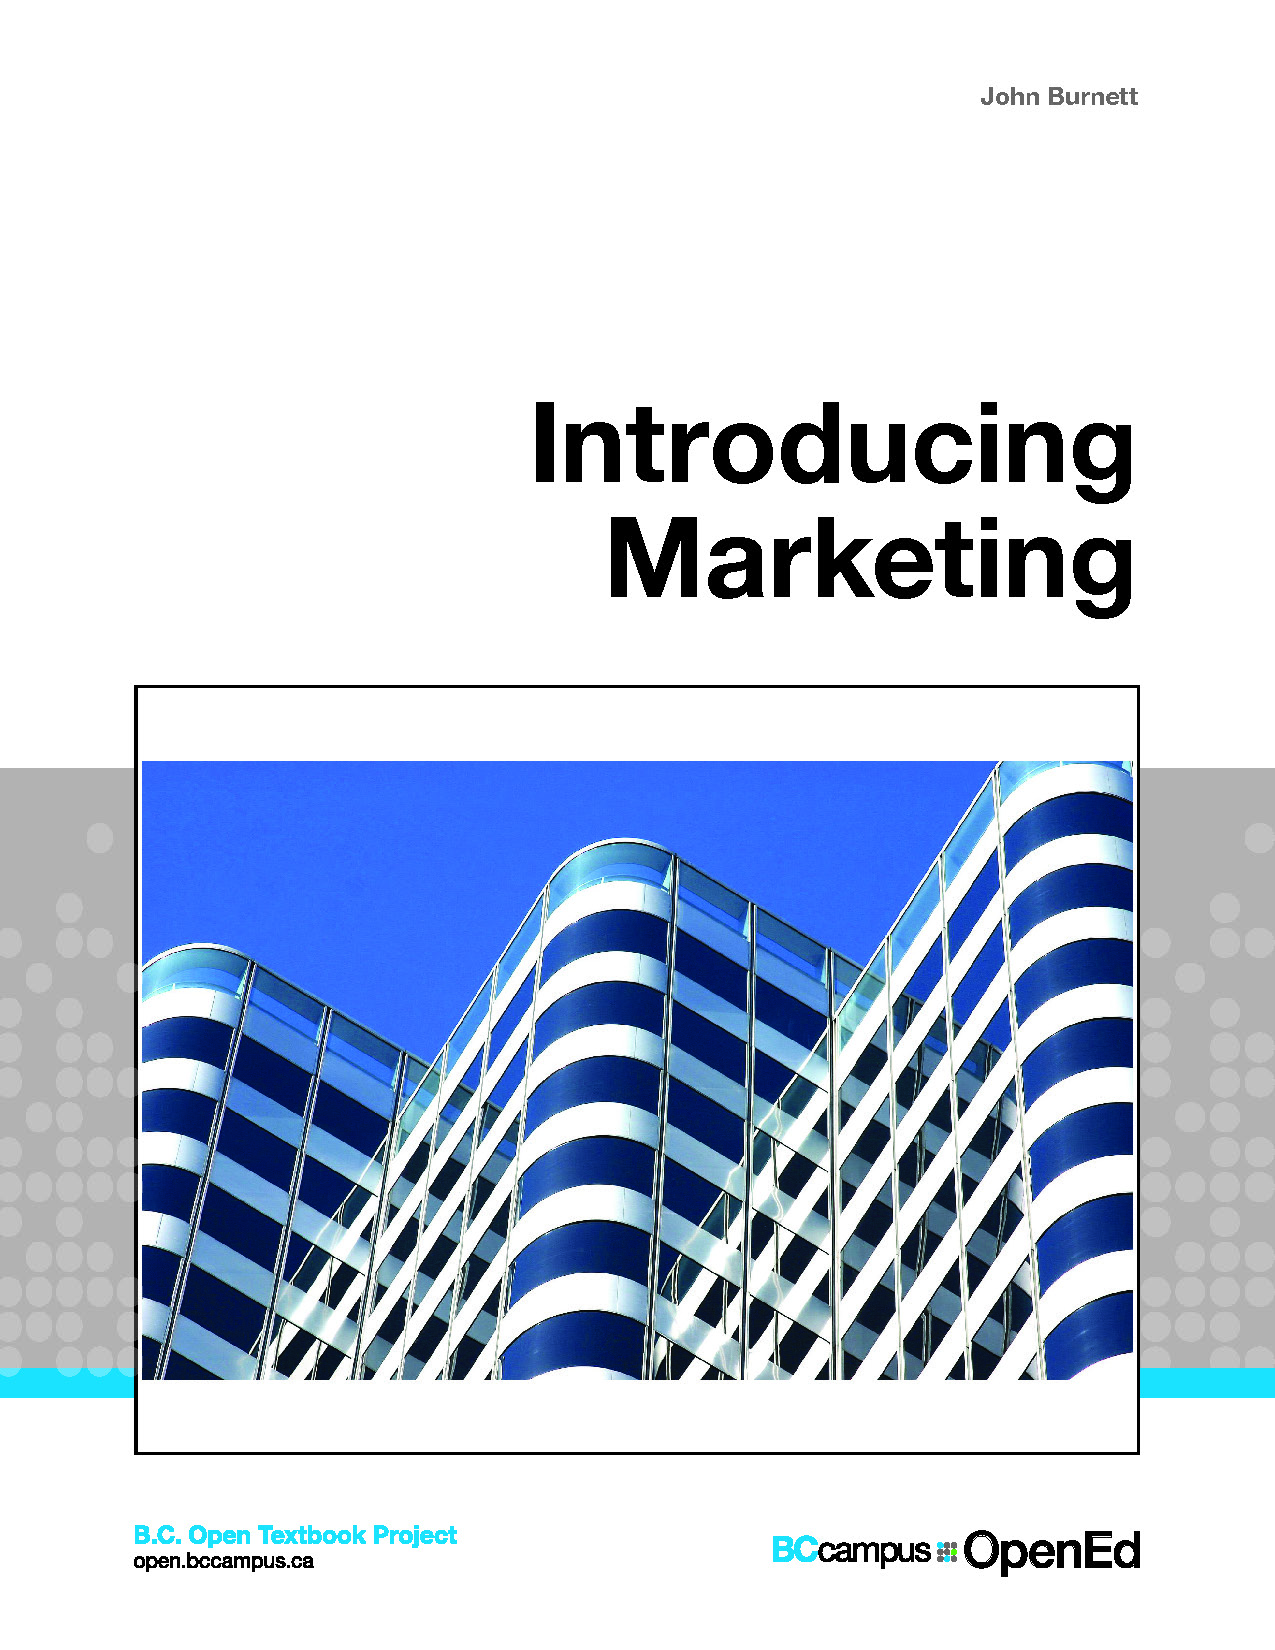 Read more about Introducing Marketing